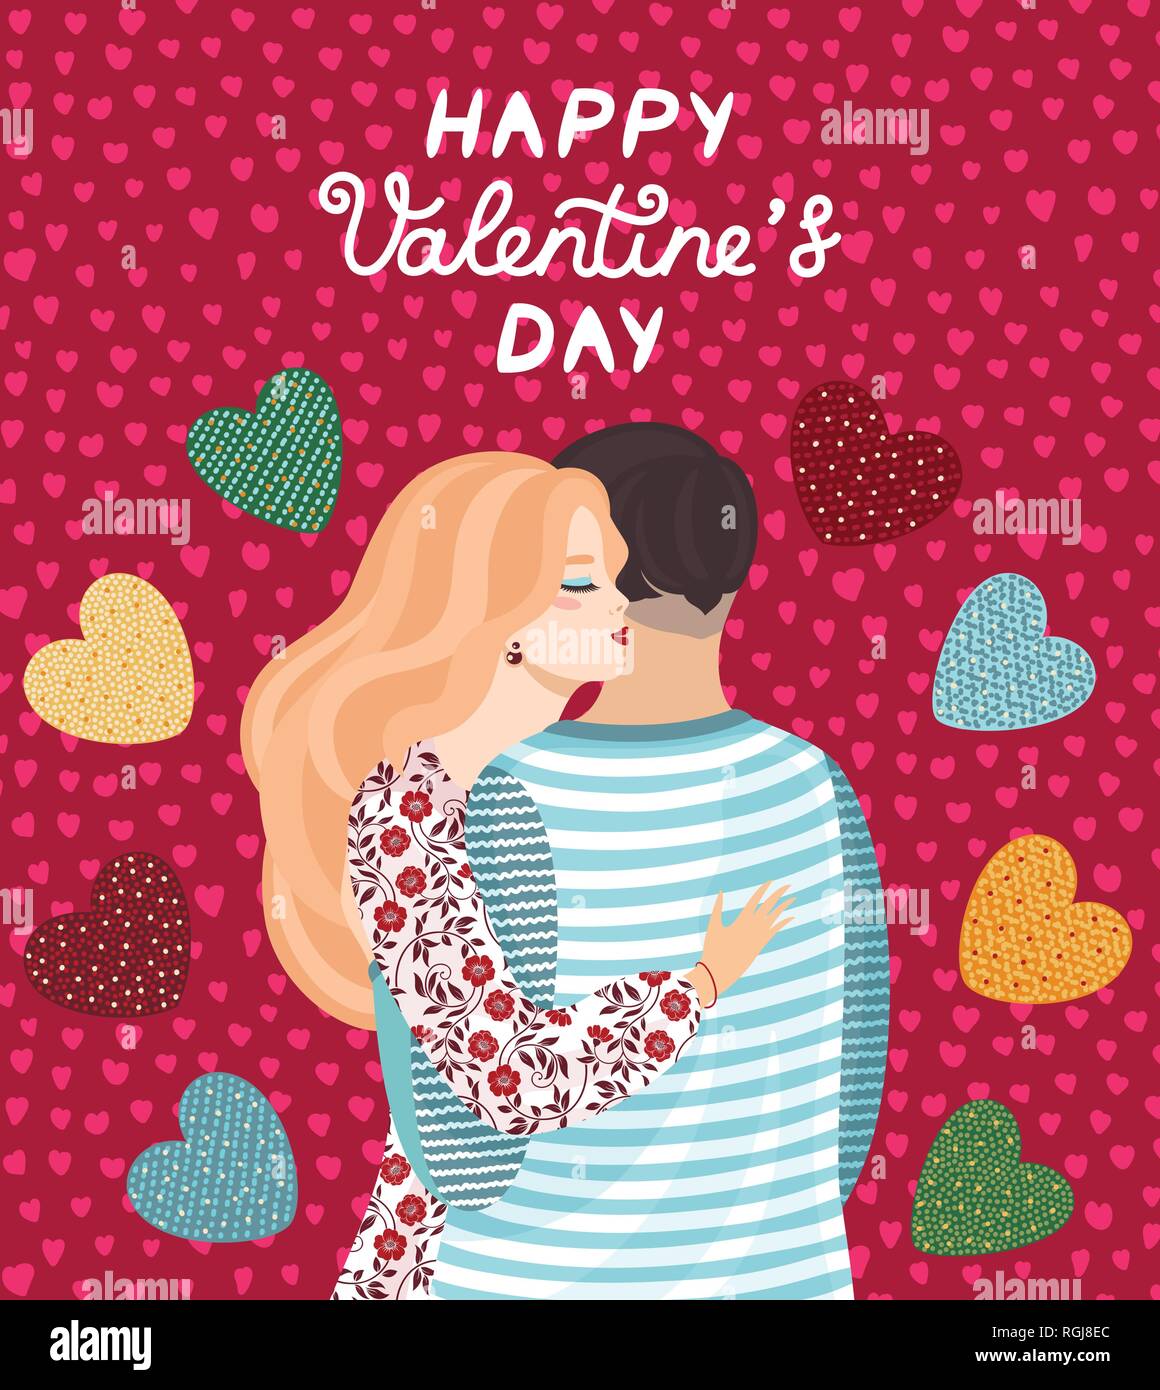 Vector design concept for Valentines Day. Vector illustration of a couple in love, cute posters, valentines day greetings. Stock Vector